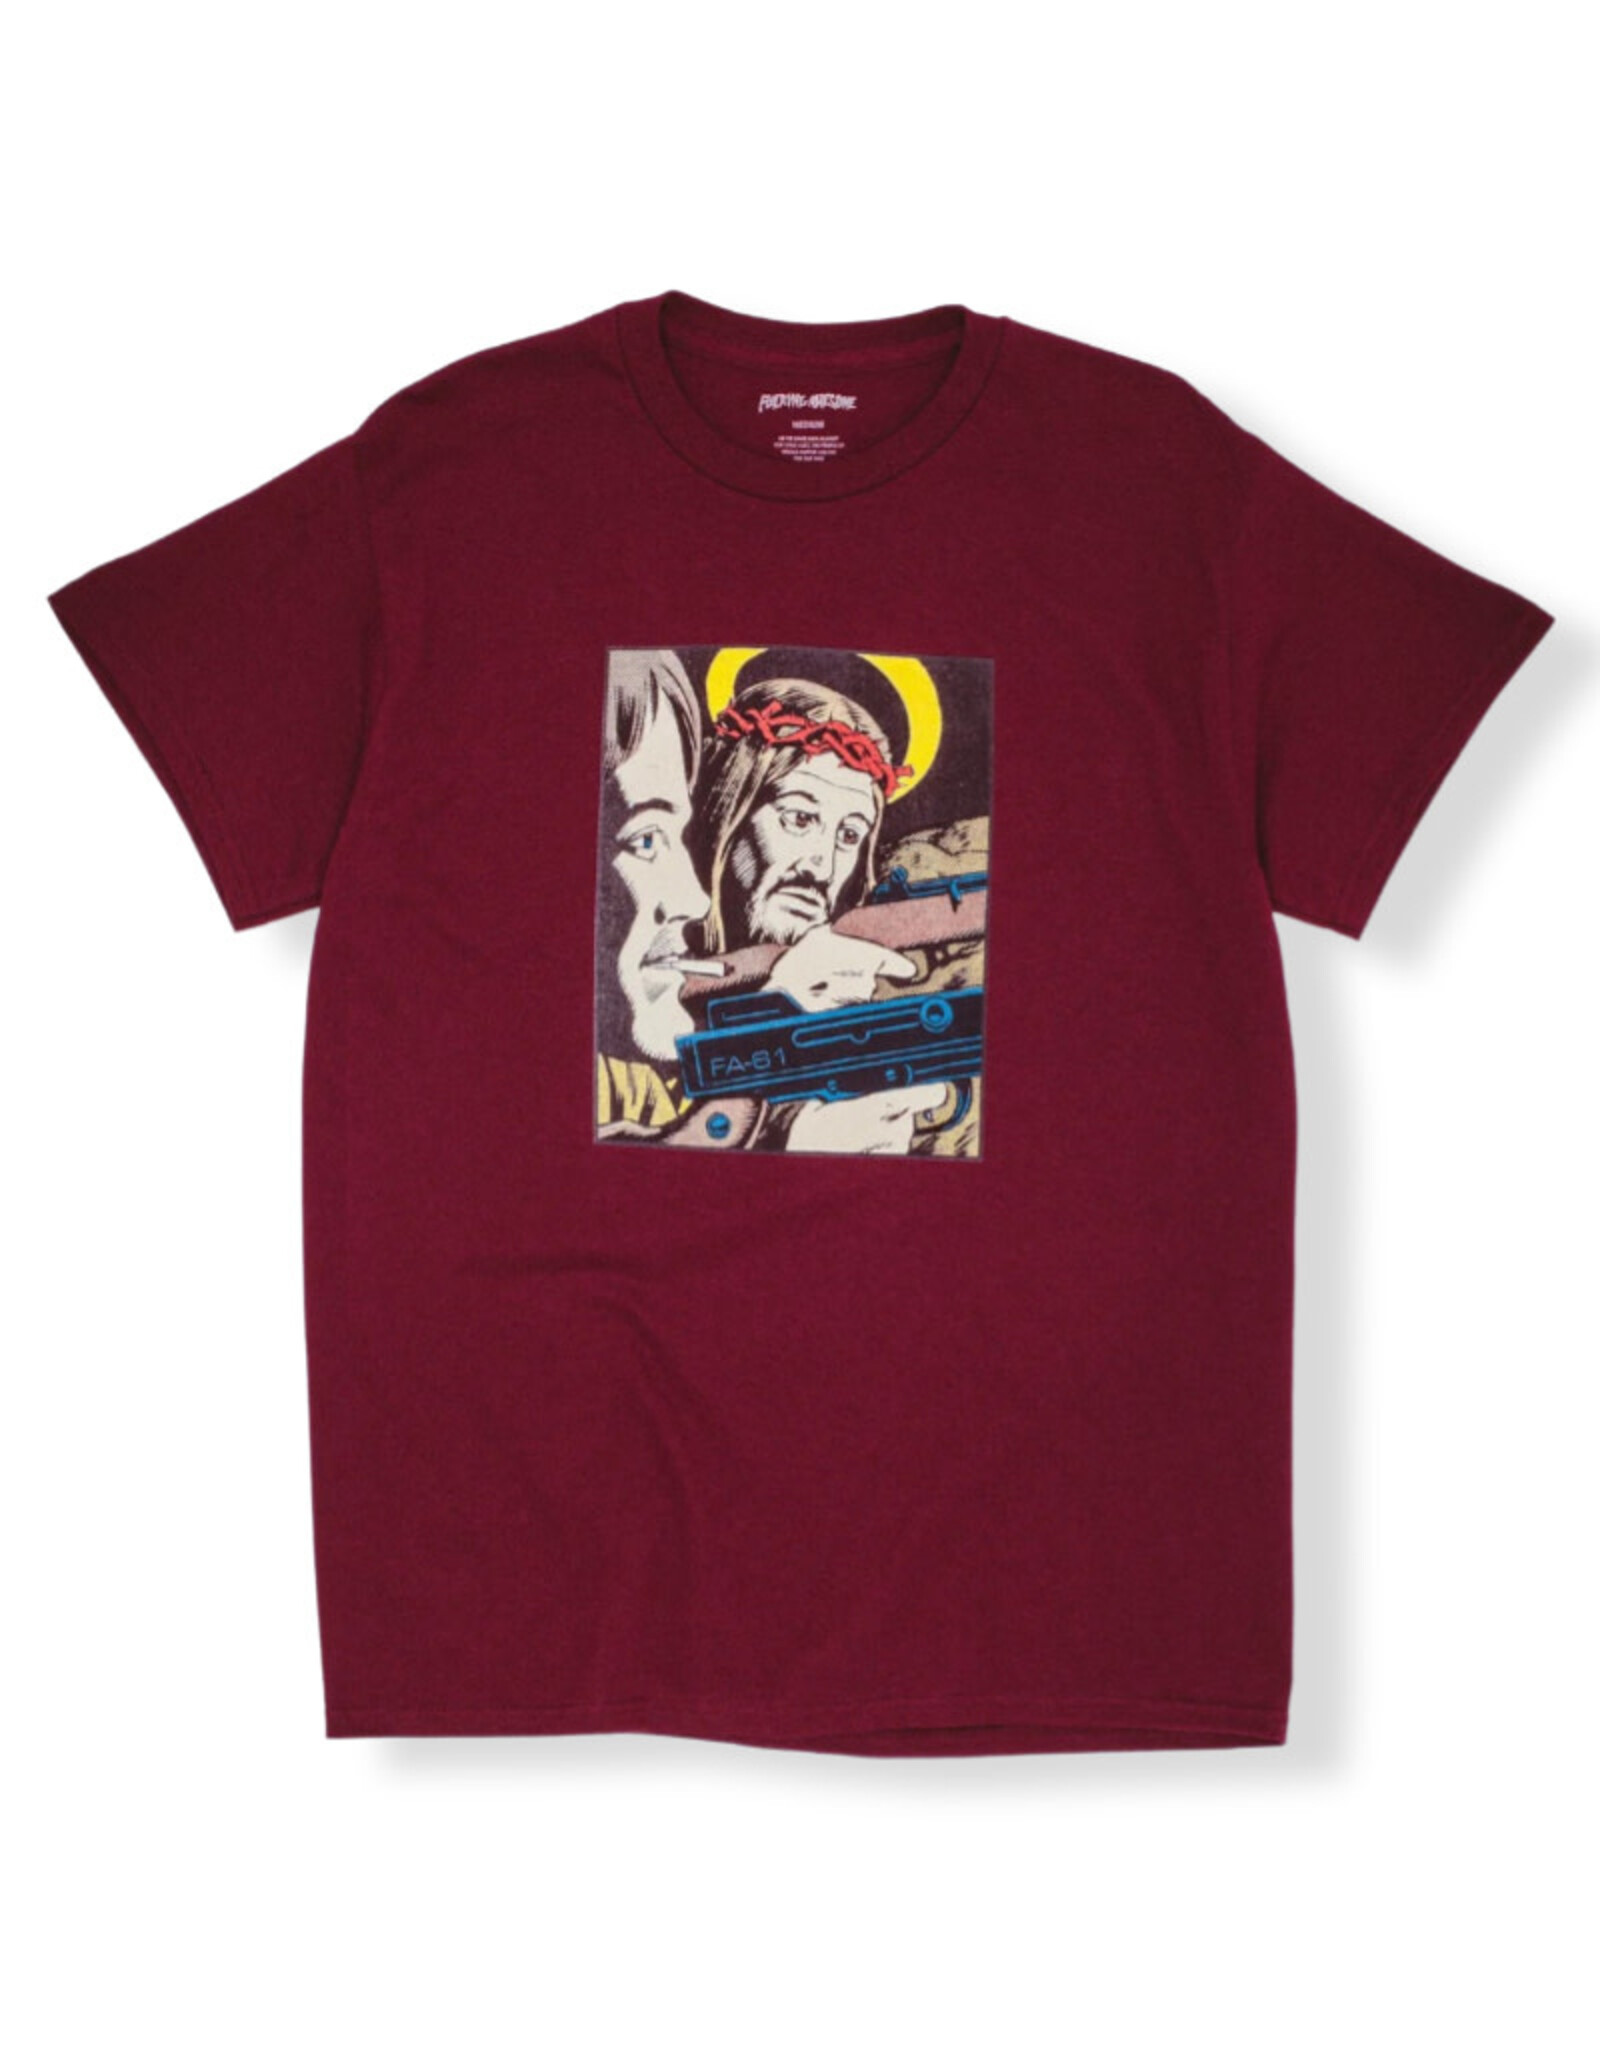 Fucking Awesome Fucking Awesome Tee Holy War S/S (Maroon)